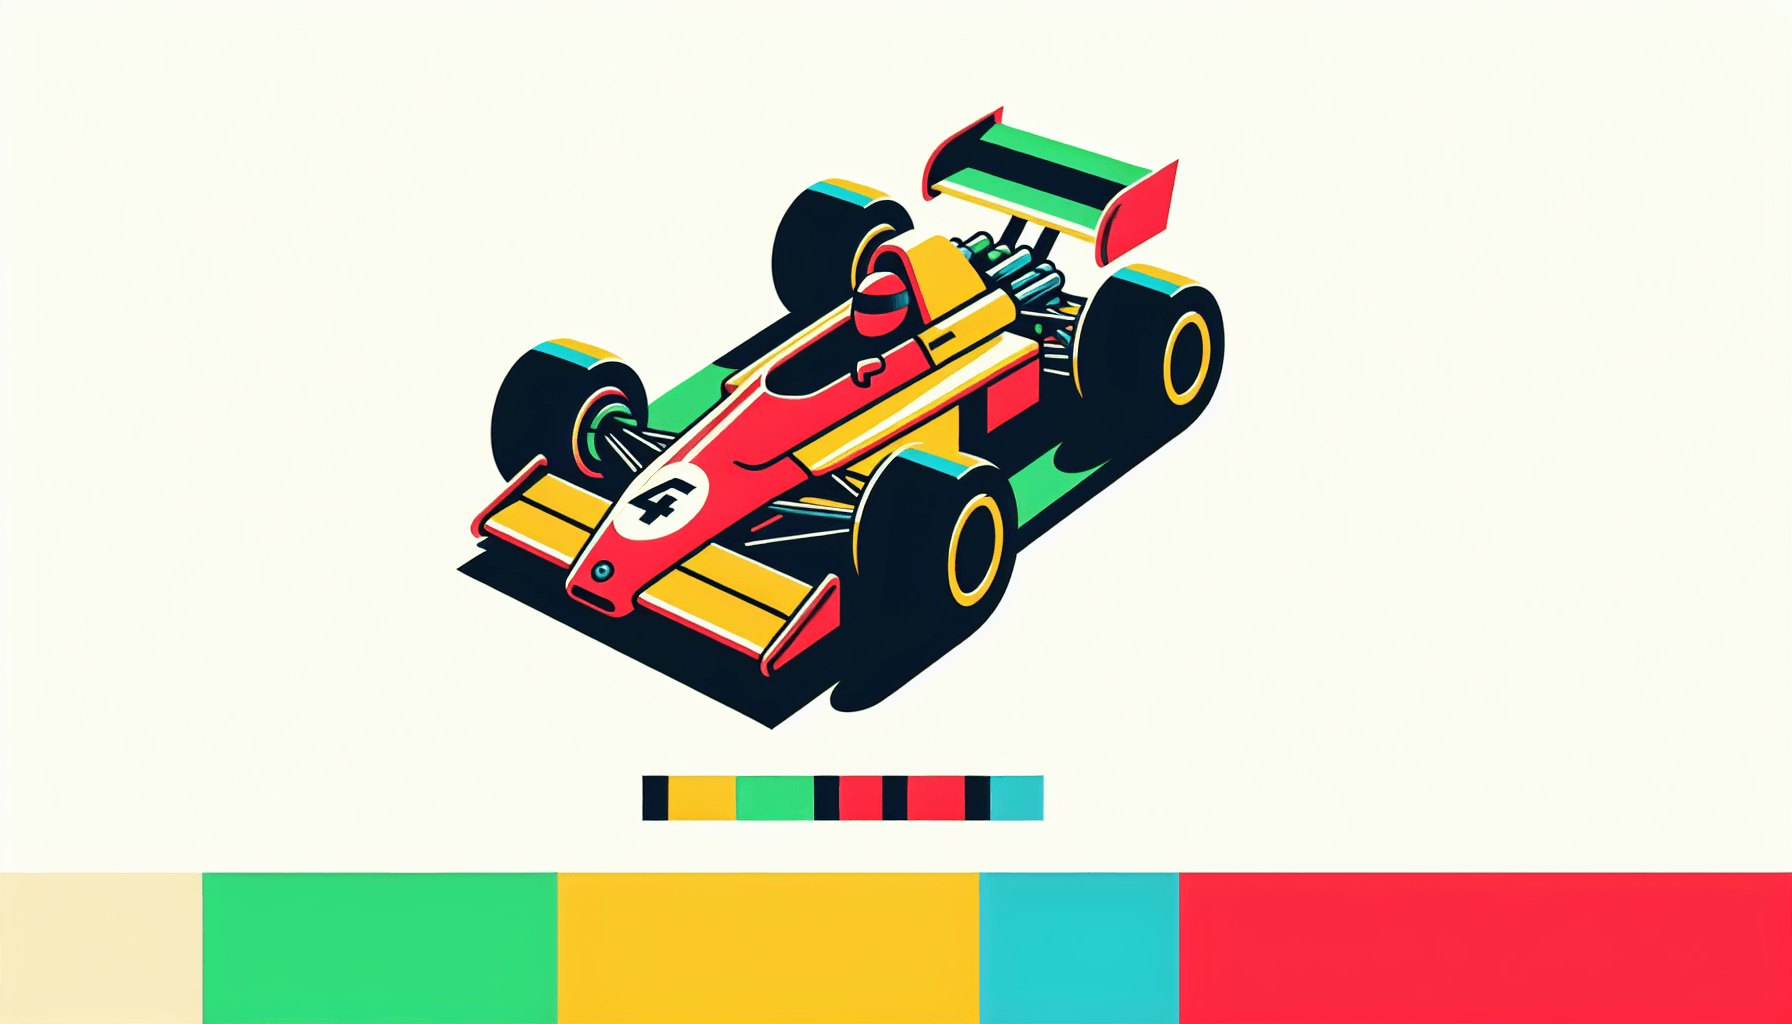 Race car in flat illustration style and white background, red #f47574, green #88c7a8, yellow #fcc44b, and blue #645bc8 colors.